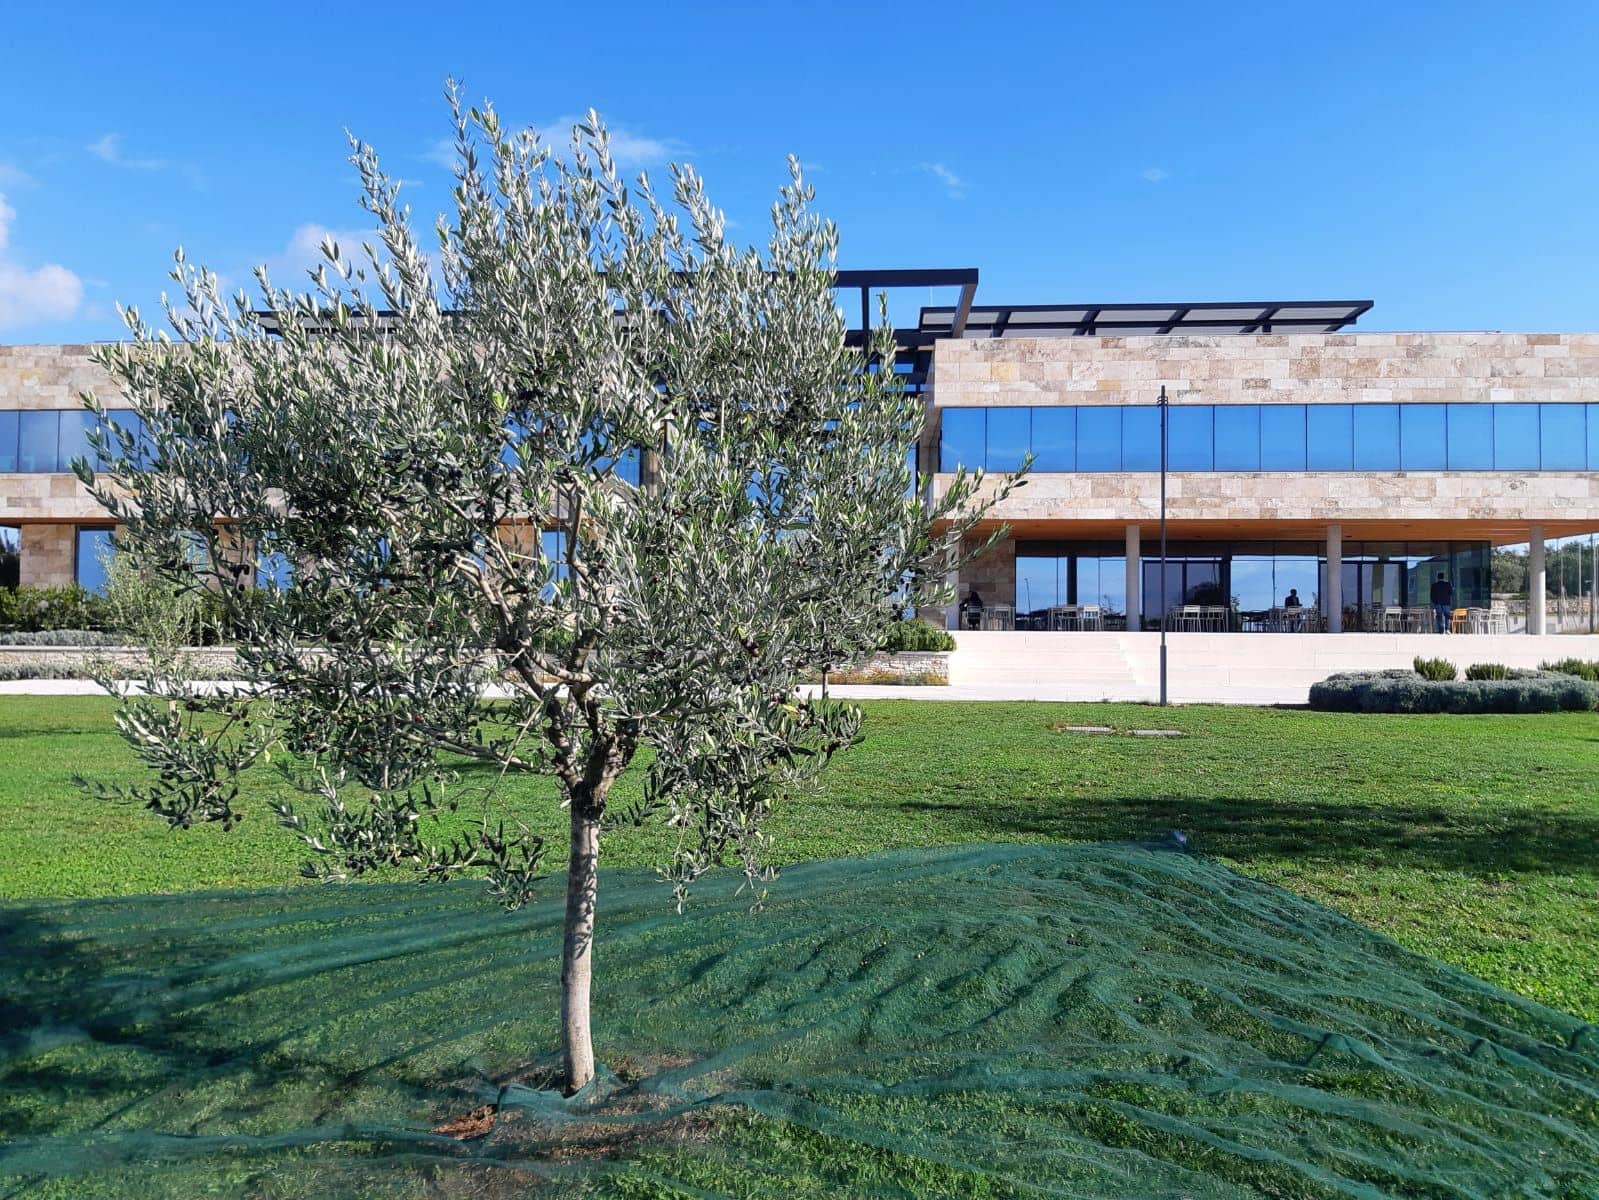 business-europe-production-croatian-tech-company-produces-awardwinning-evoo-for-gifting-olive-oil-times